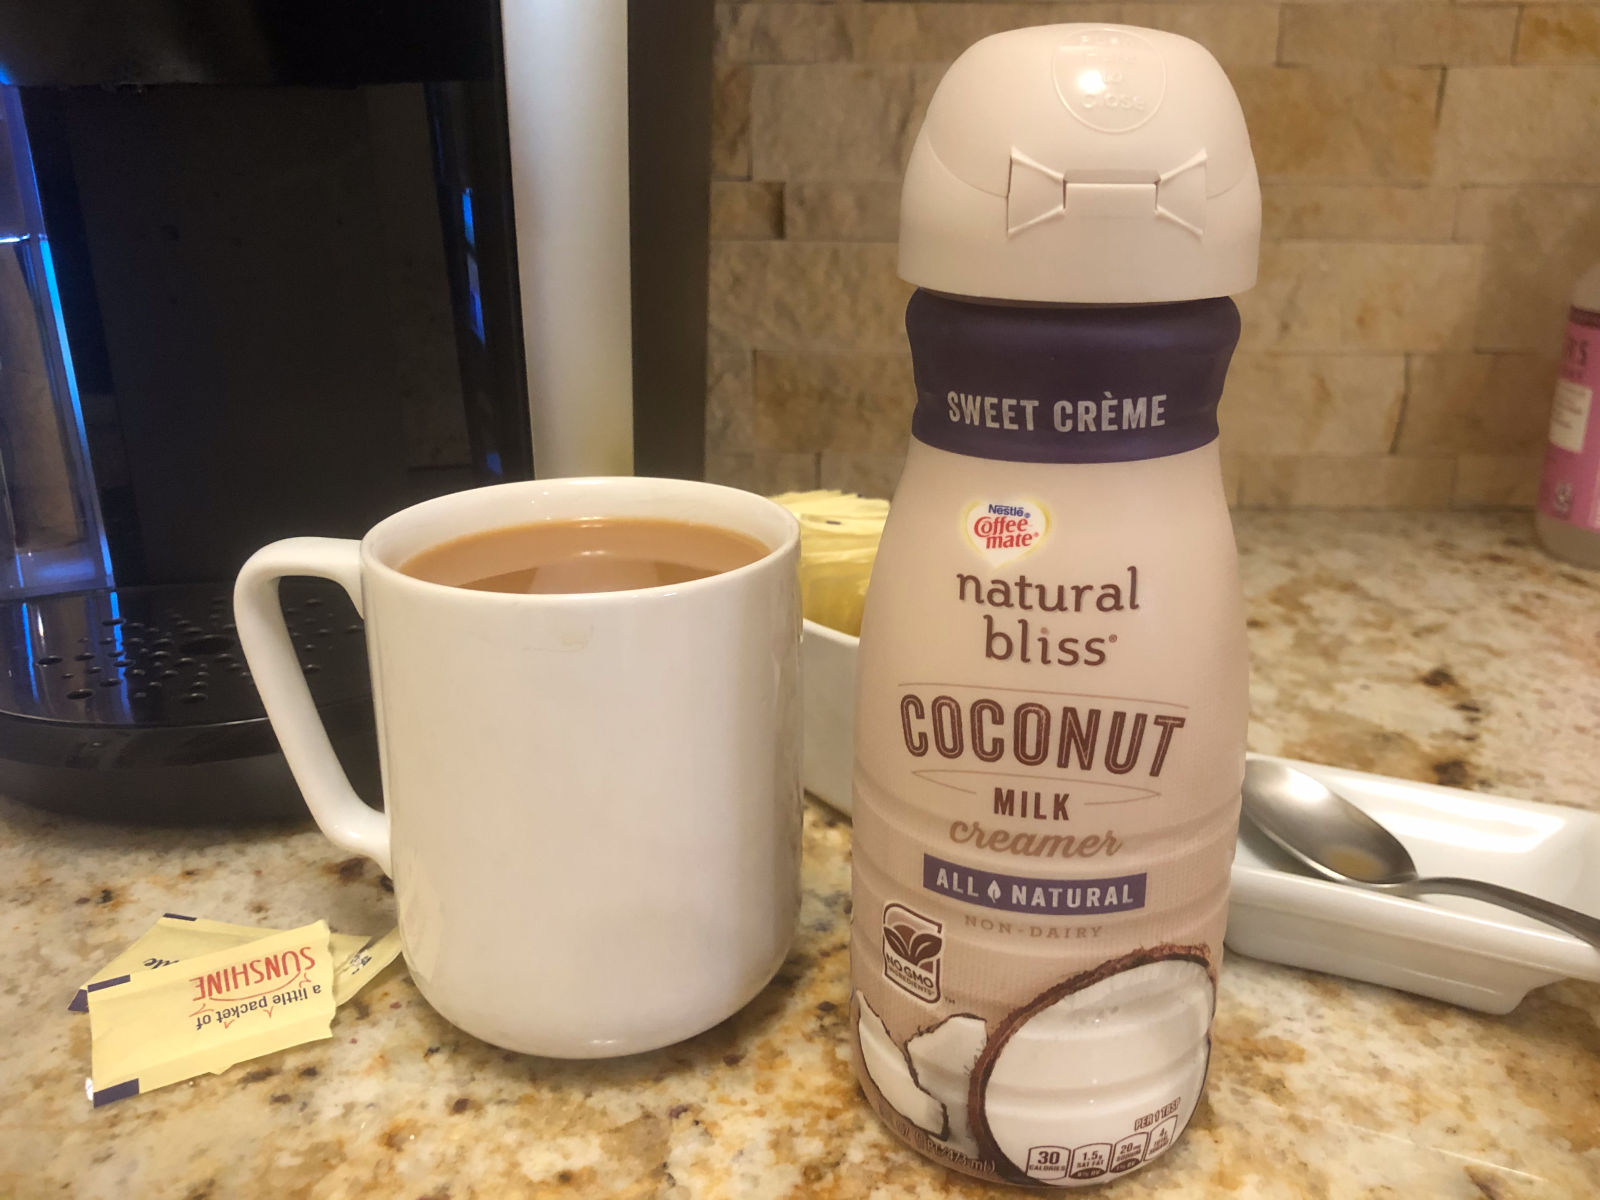 Try natural bliss® Sweet Crème Coconut Milk & natural bliss® Vanilla Almond Milk & Enjoy All-Natural, Non-Dairy Deliciousness! on I Heart Publix 1